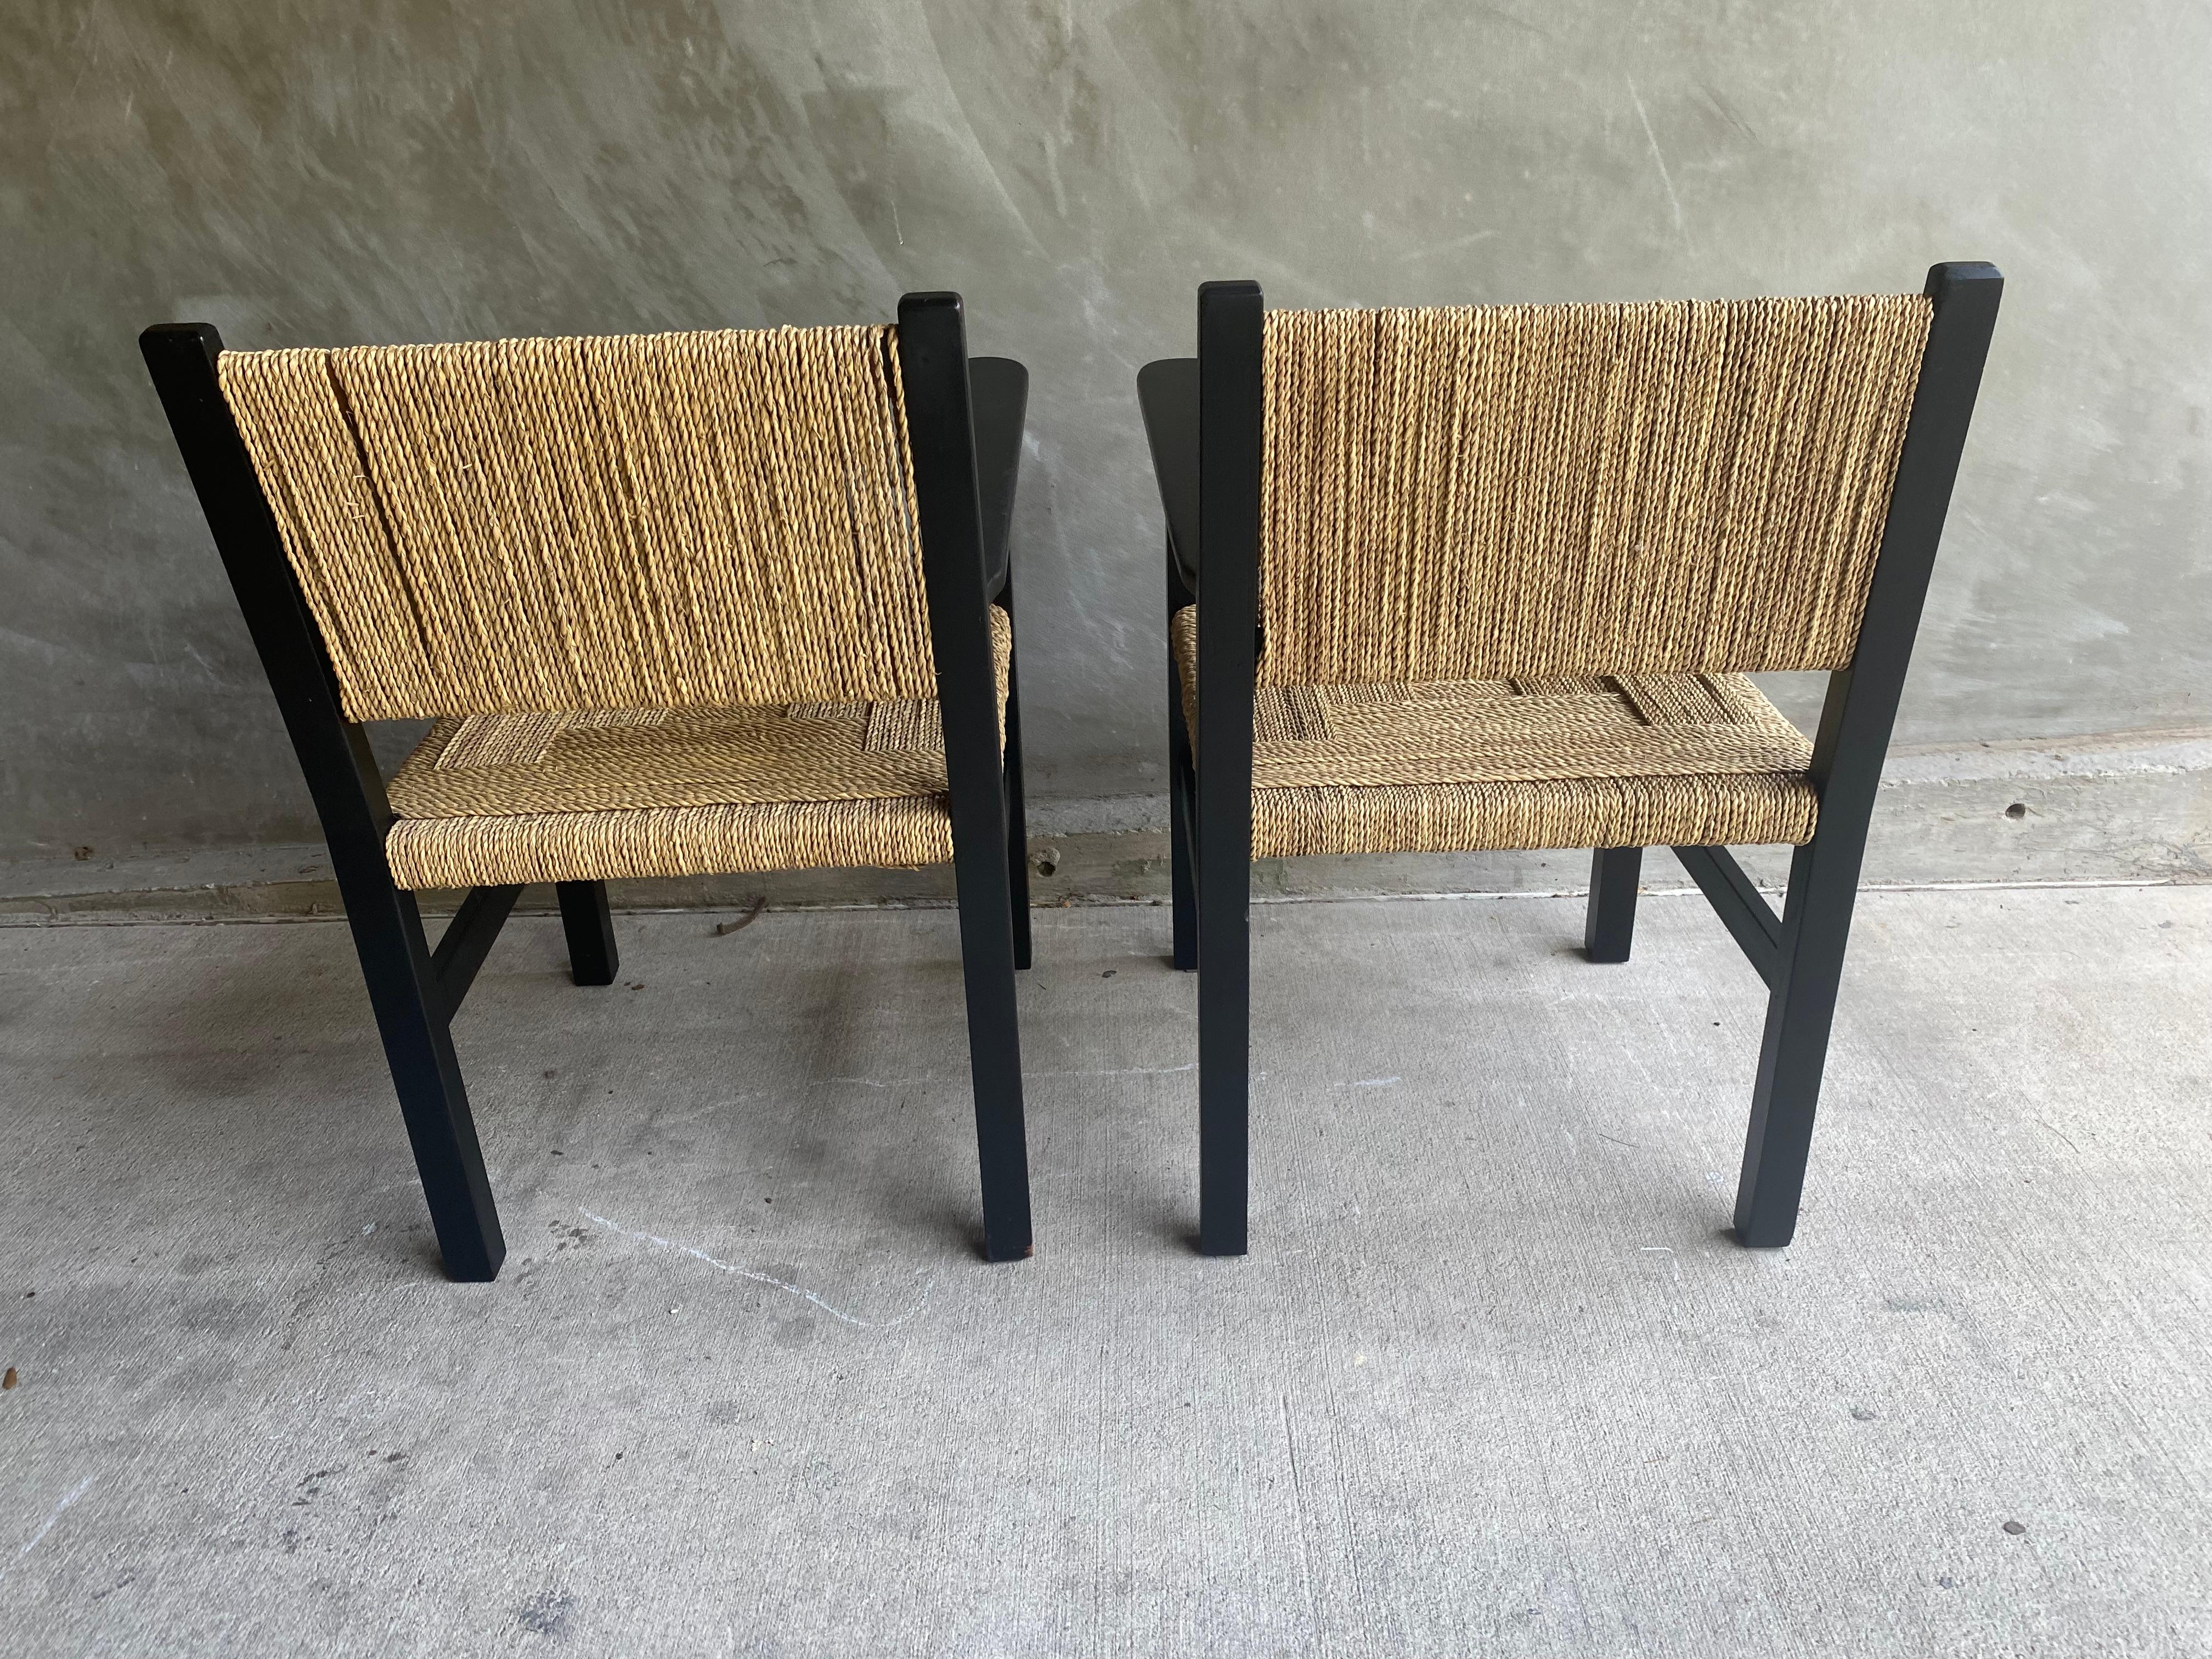 Pair of Black Lacquered and Woven Rope Armchairs, France, 1950's For Sale 4